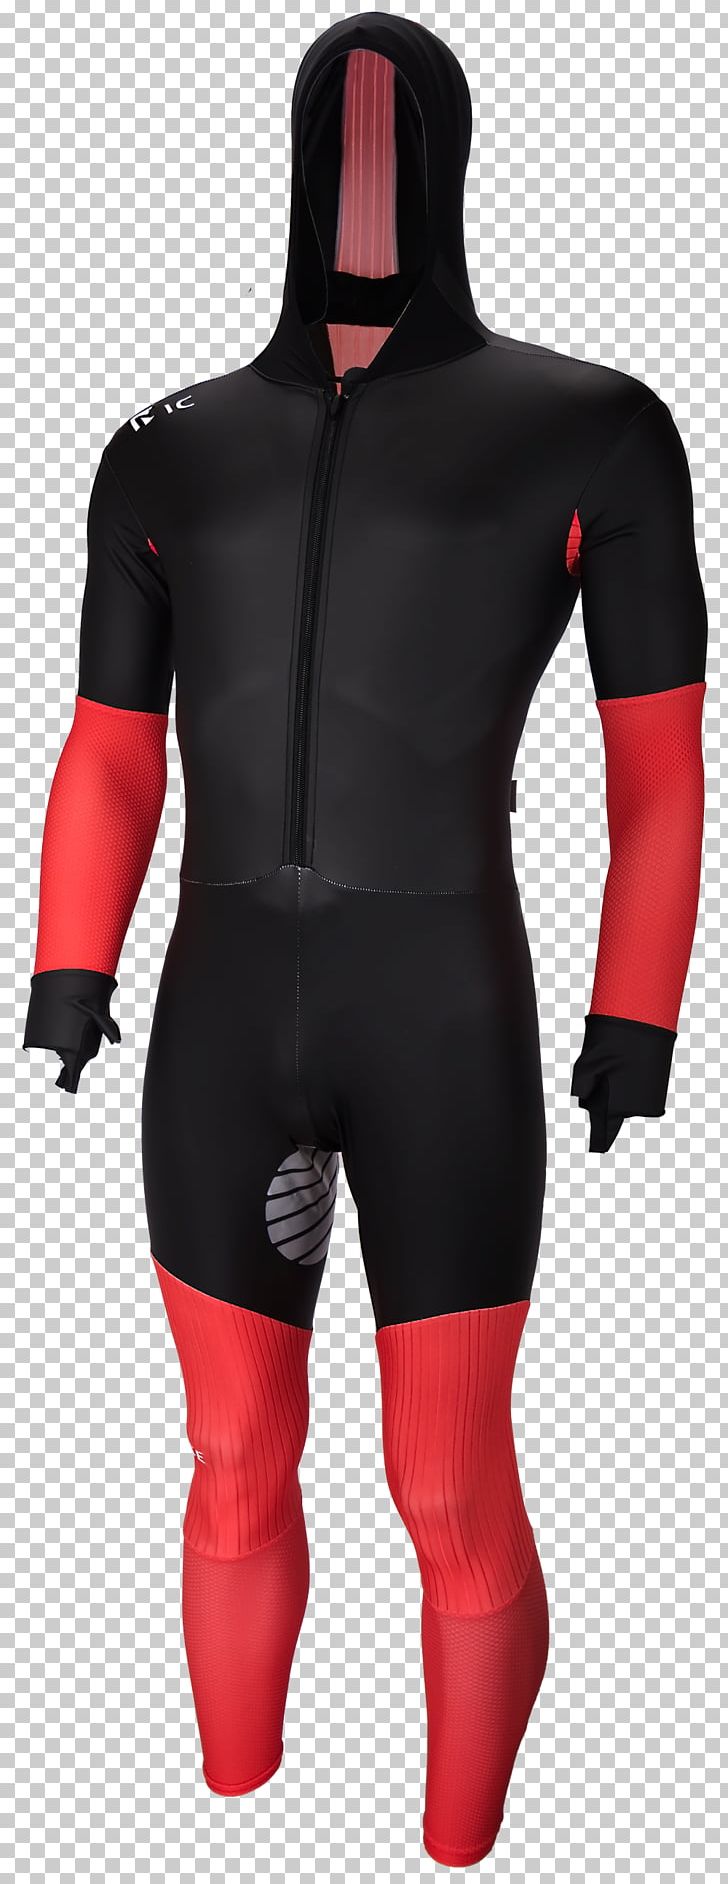 Schaatspak Wetsuit Ice Skating Red PNG, Clipart, Black, Black Red White, Cap, Clothing Accessories, Costume Free PNG Download